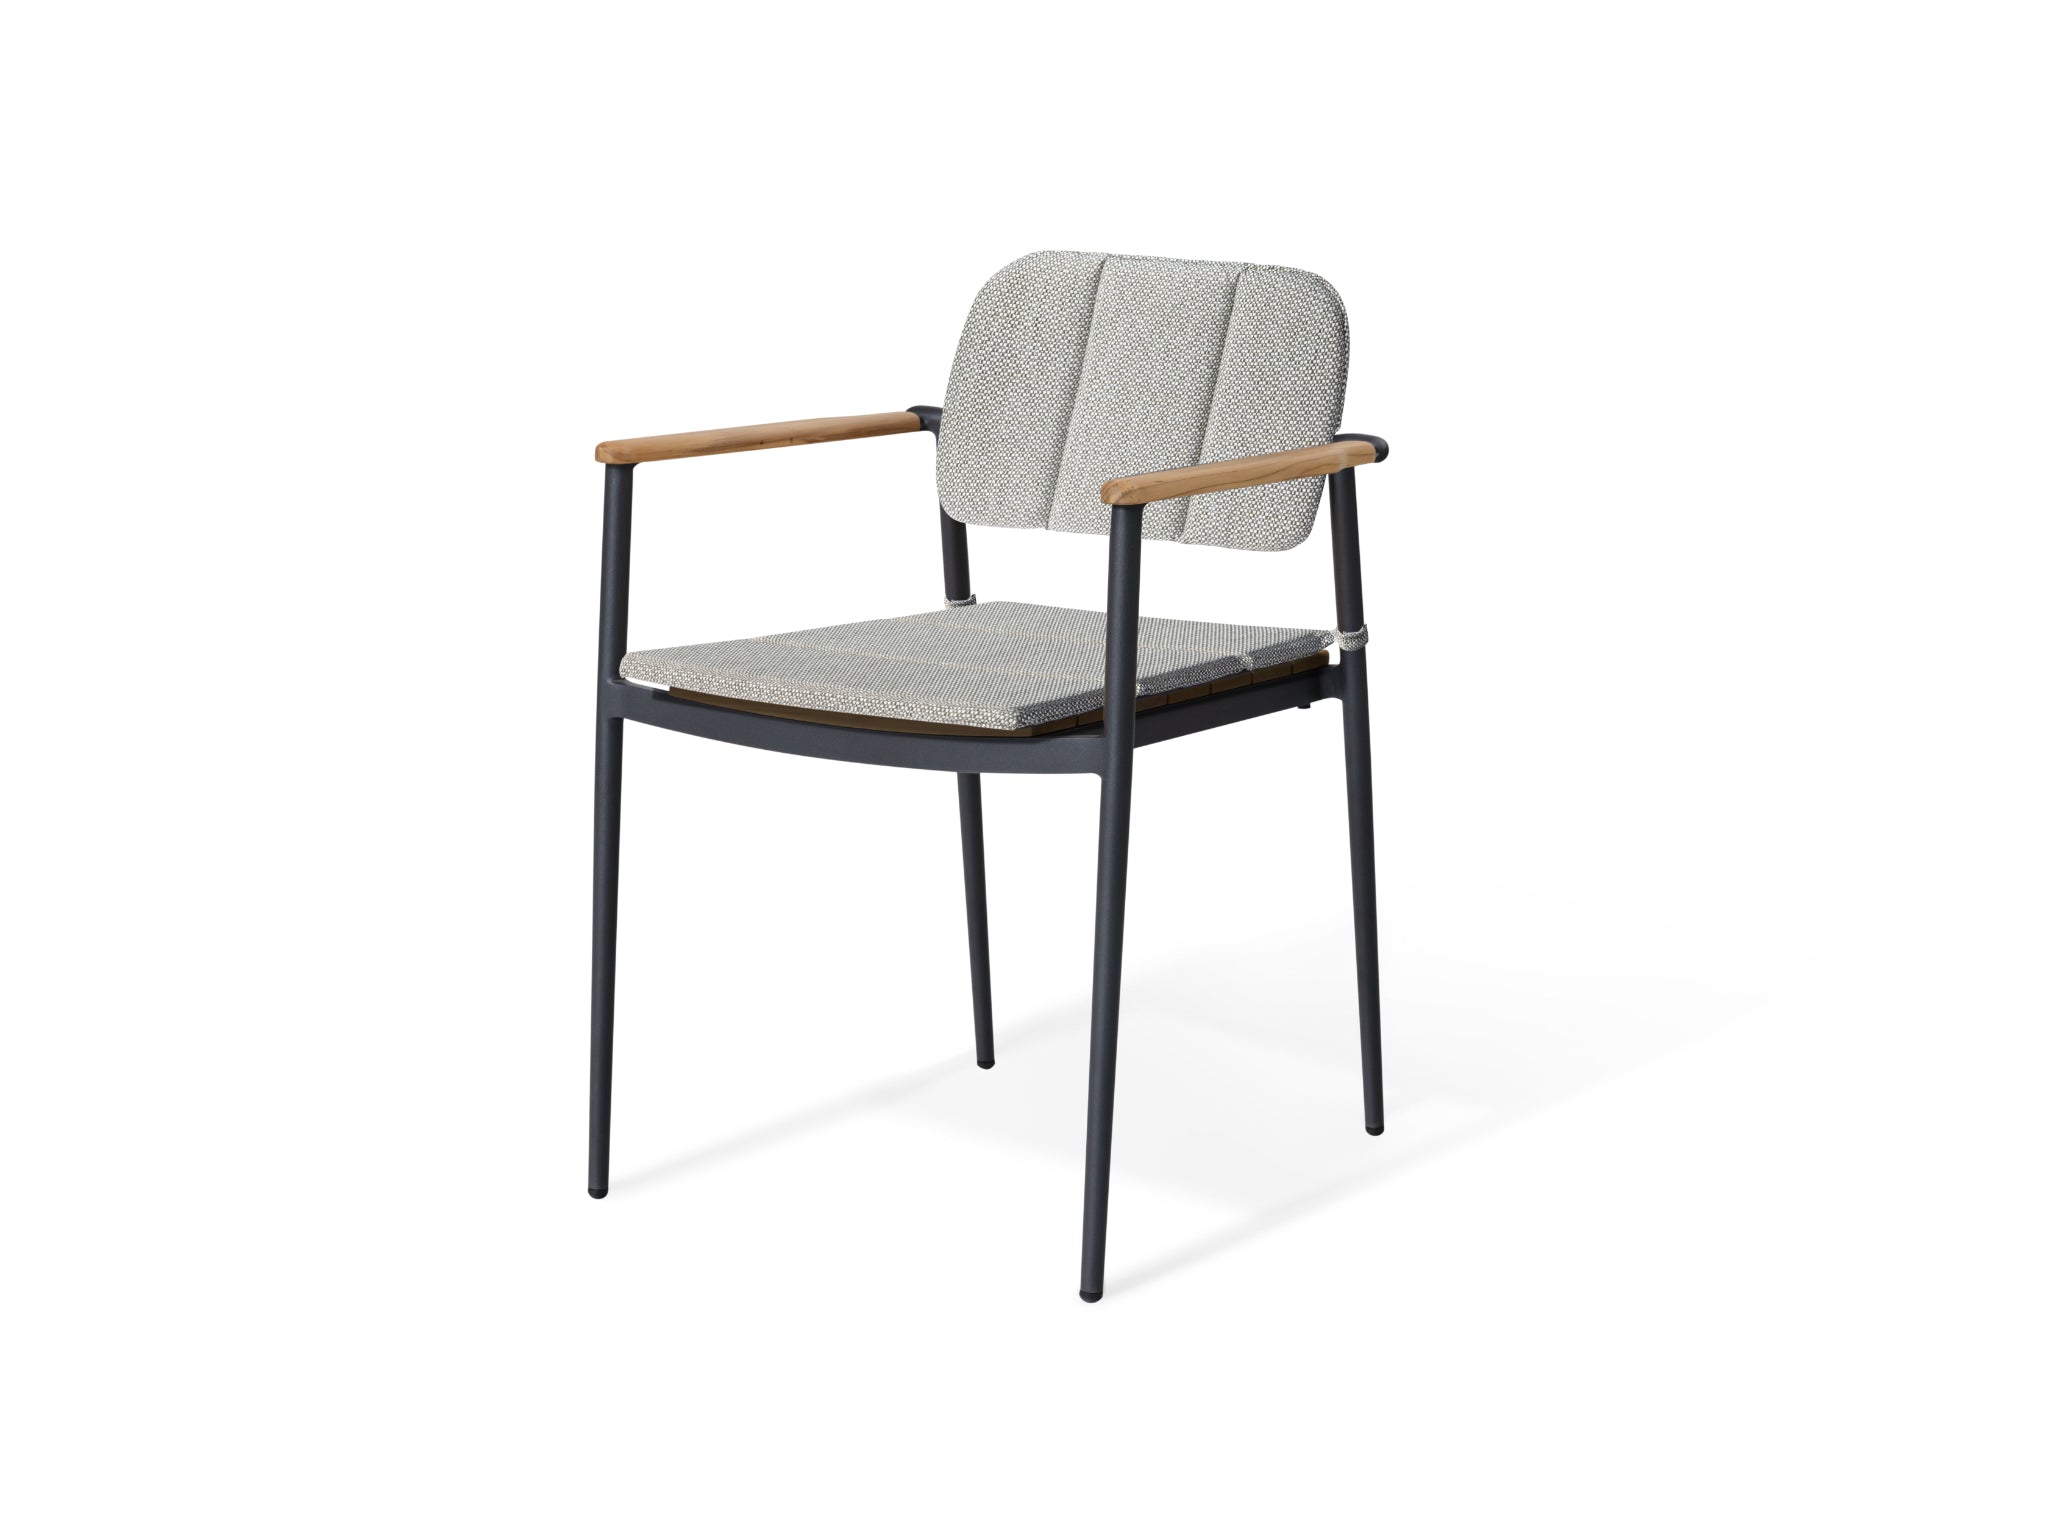 SIMPO by Sunlongarden Pier Dining Chair